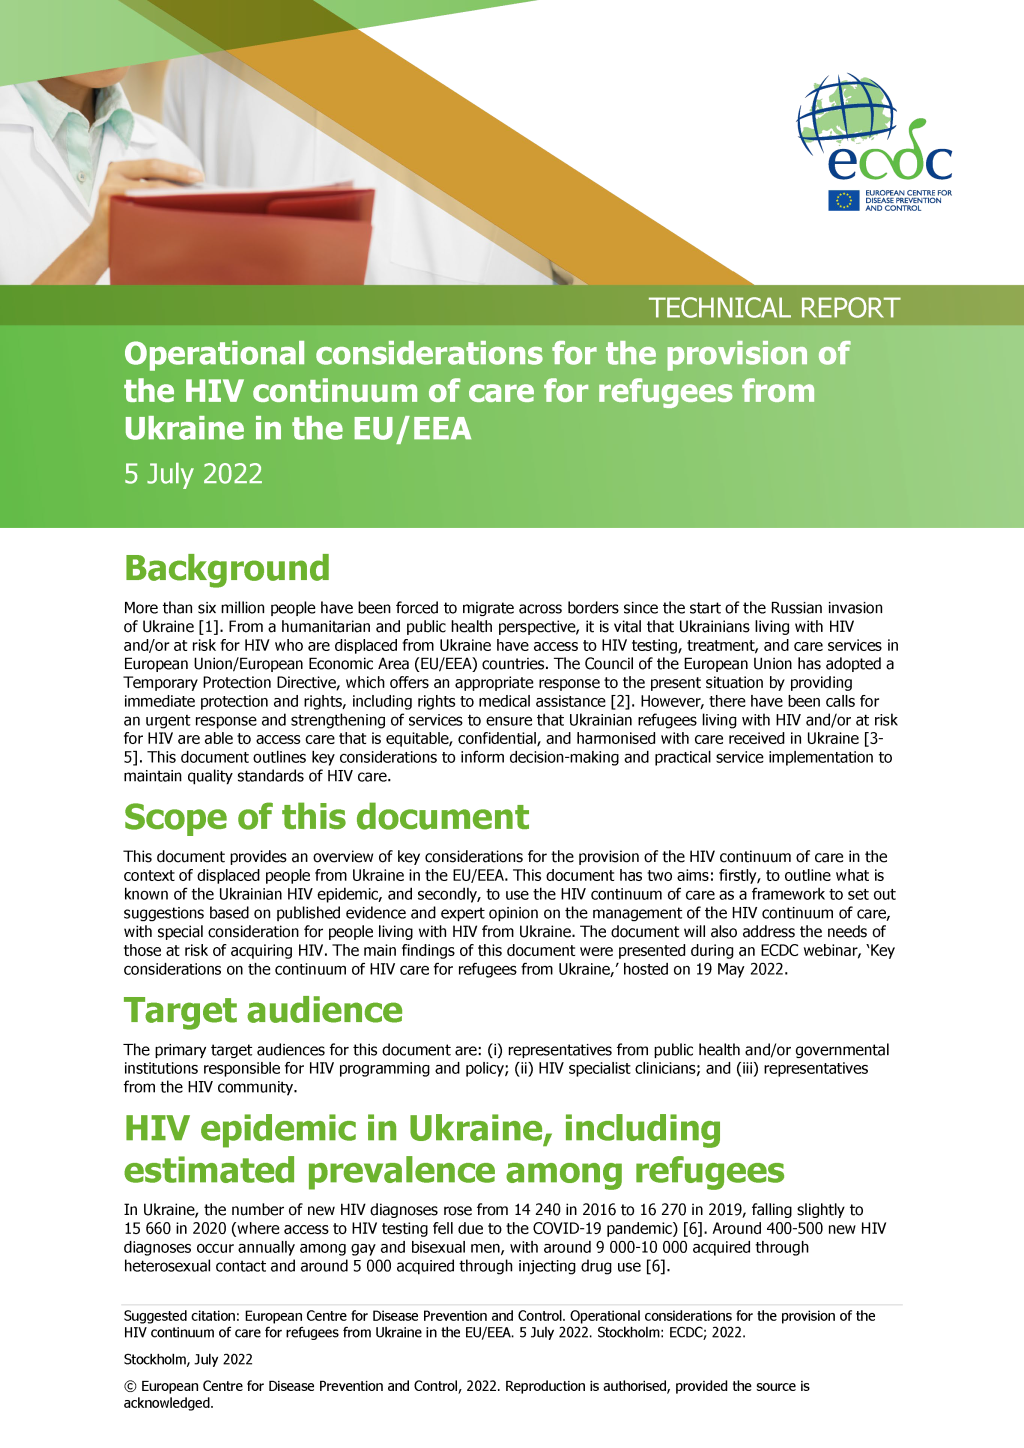 Operational-considerations-provision-HIV-care-for-Ukraine-refugees.png